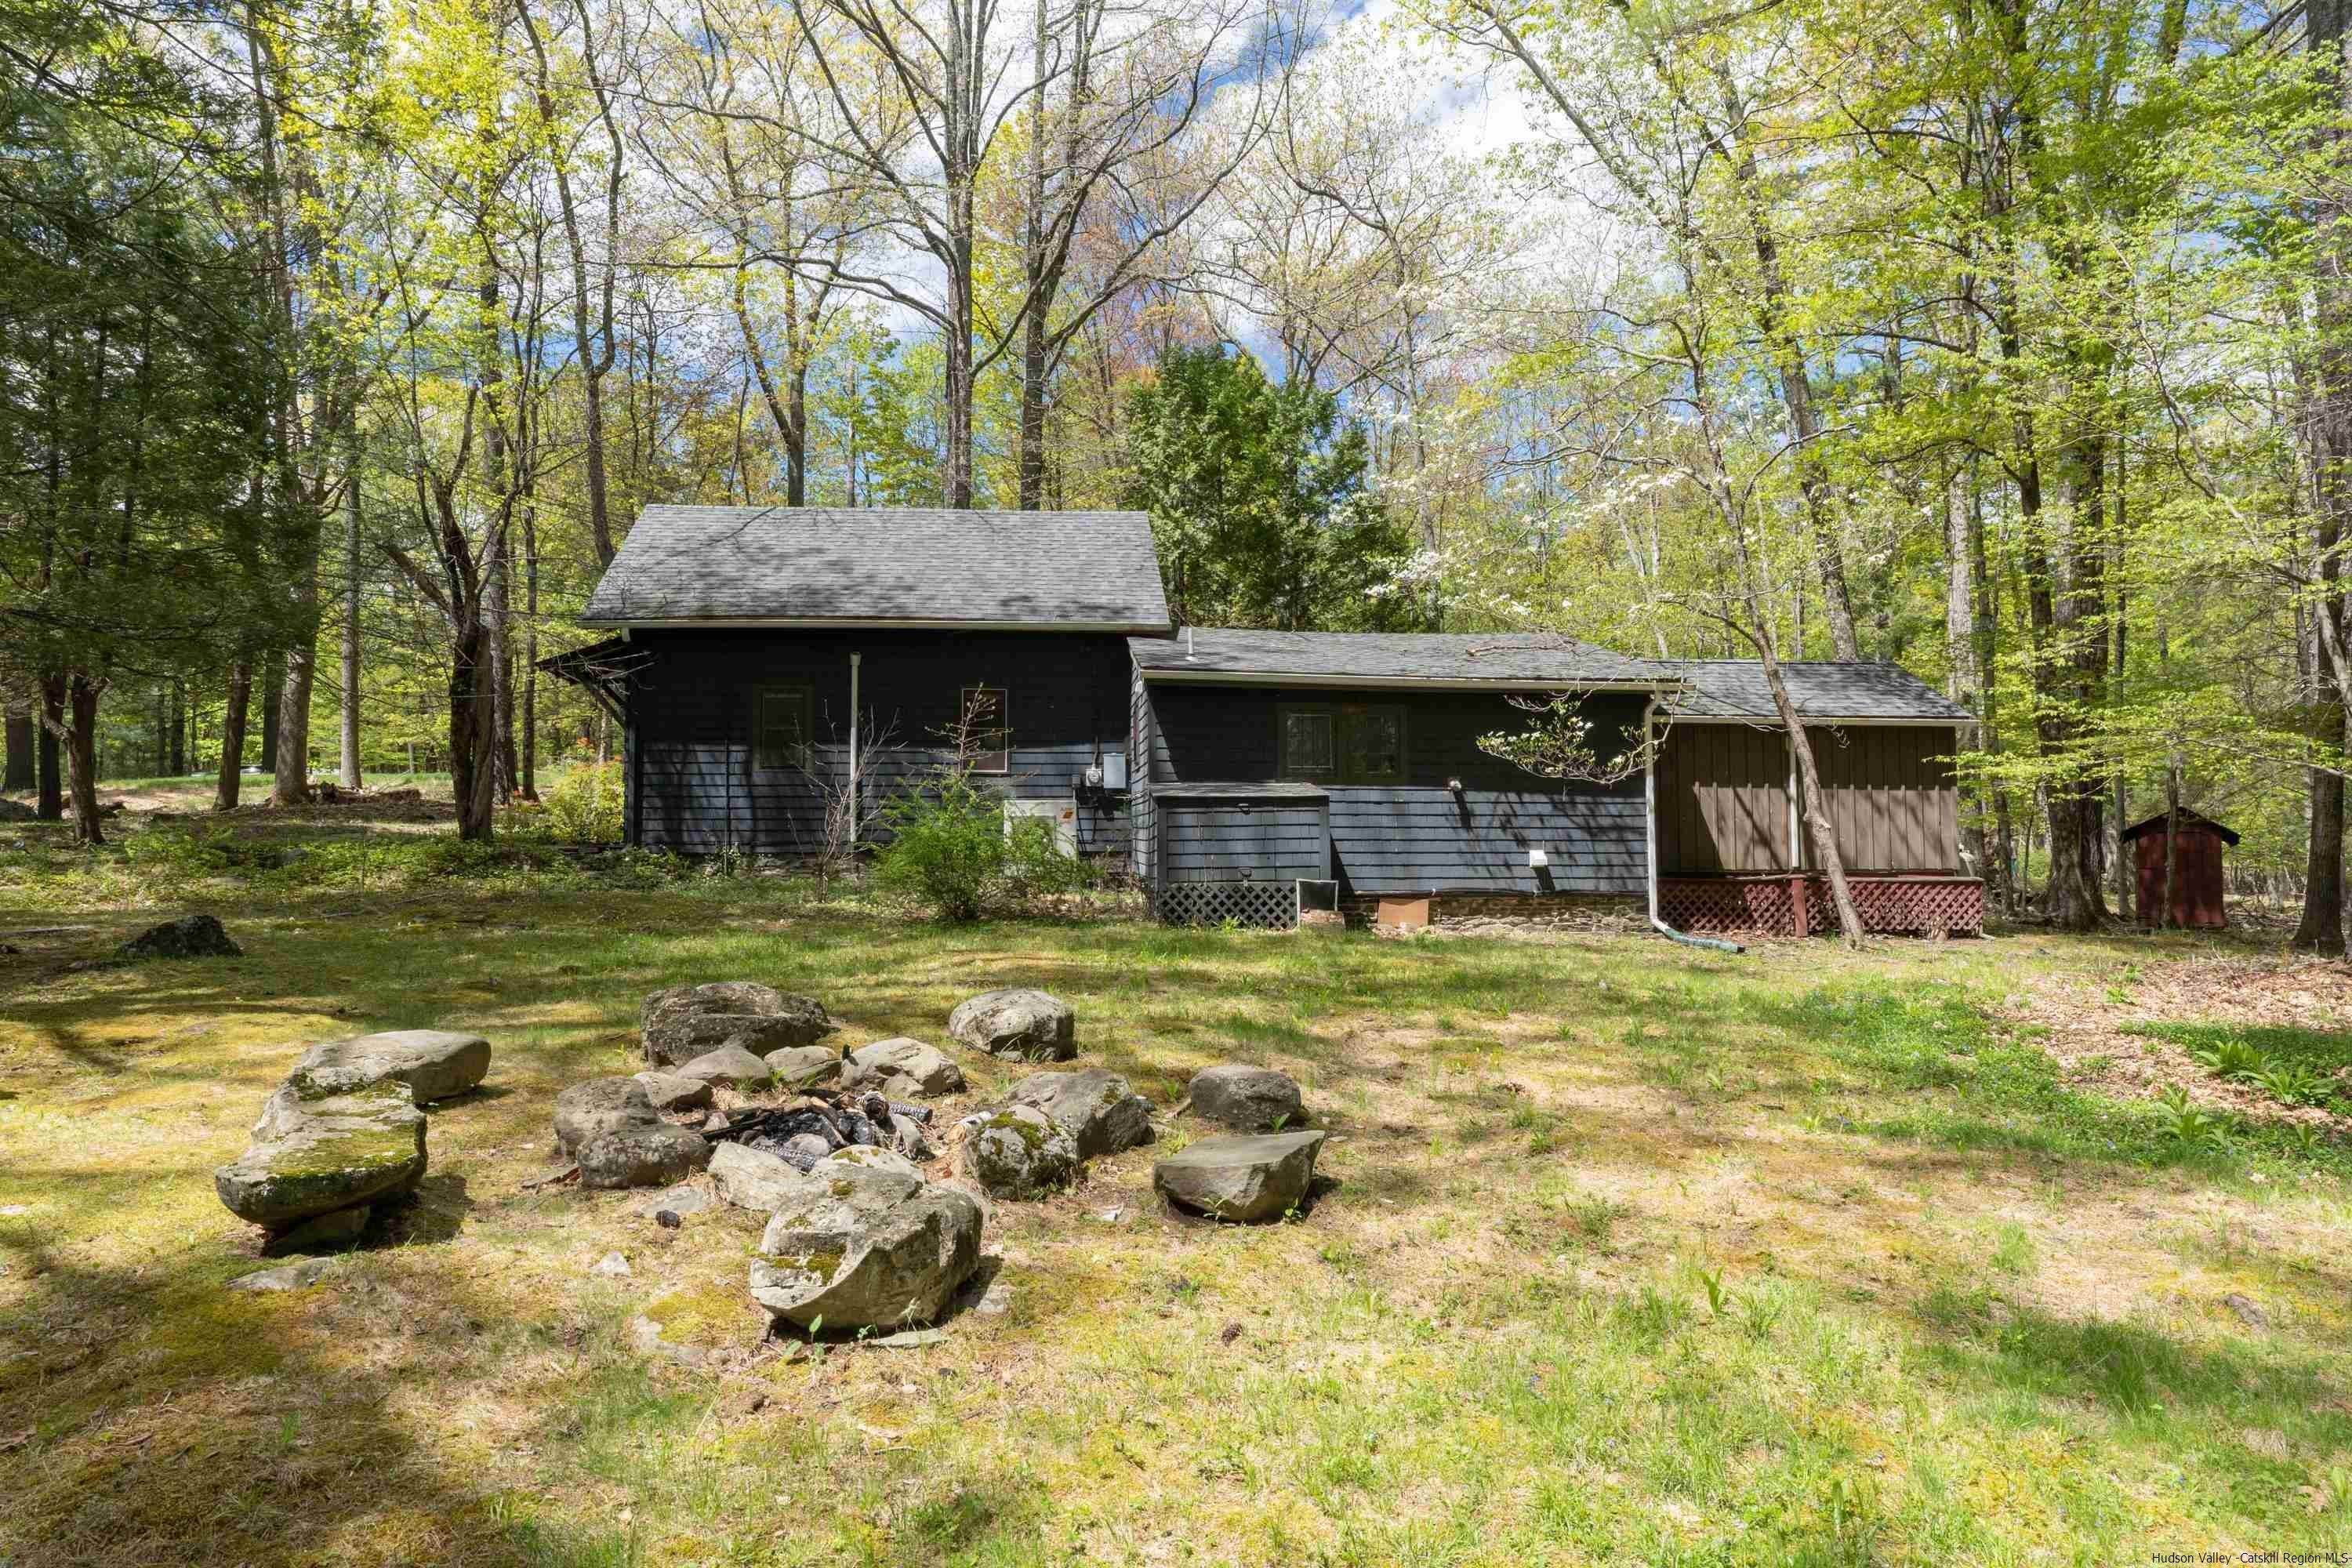 14. Two Family for Sale at 72-74 Speare Road Woodstock, New York 12498 United States